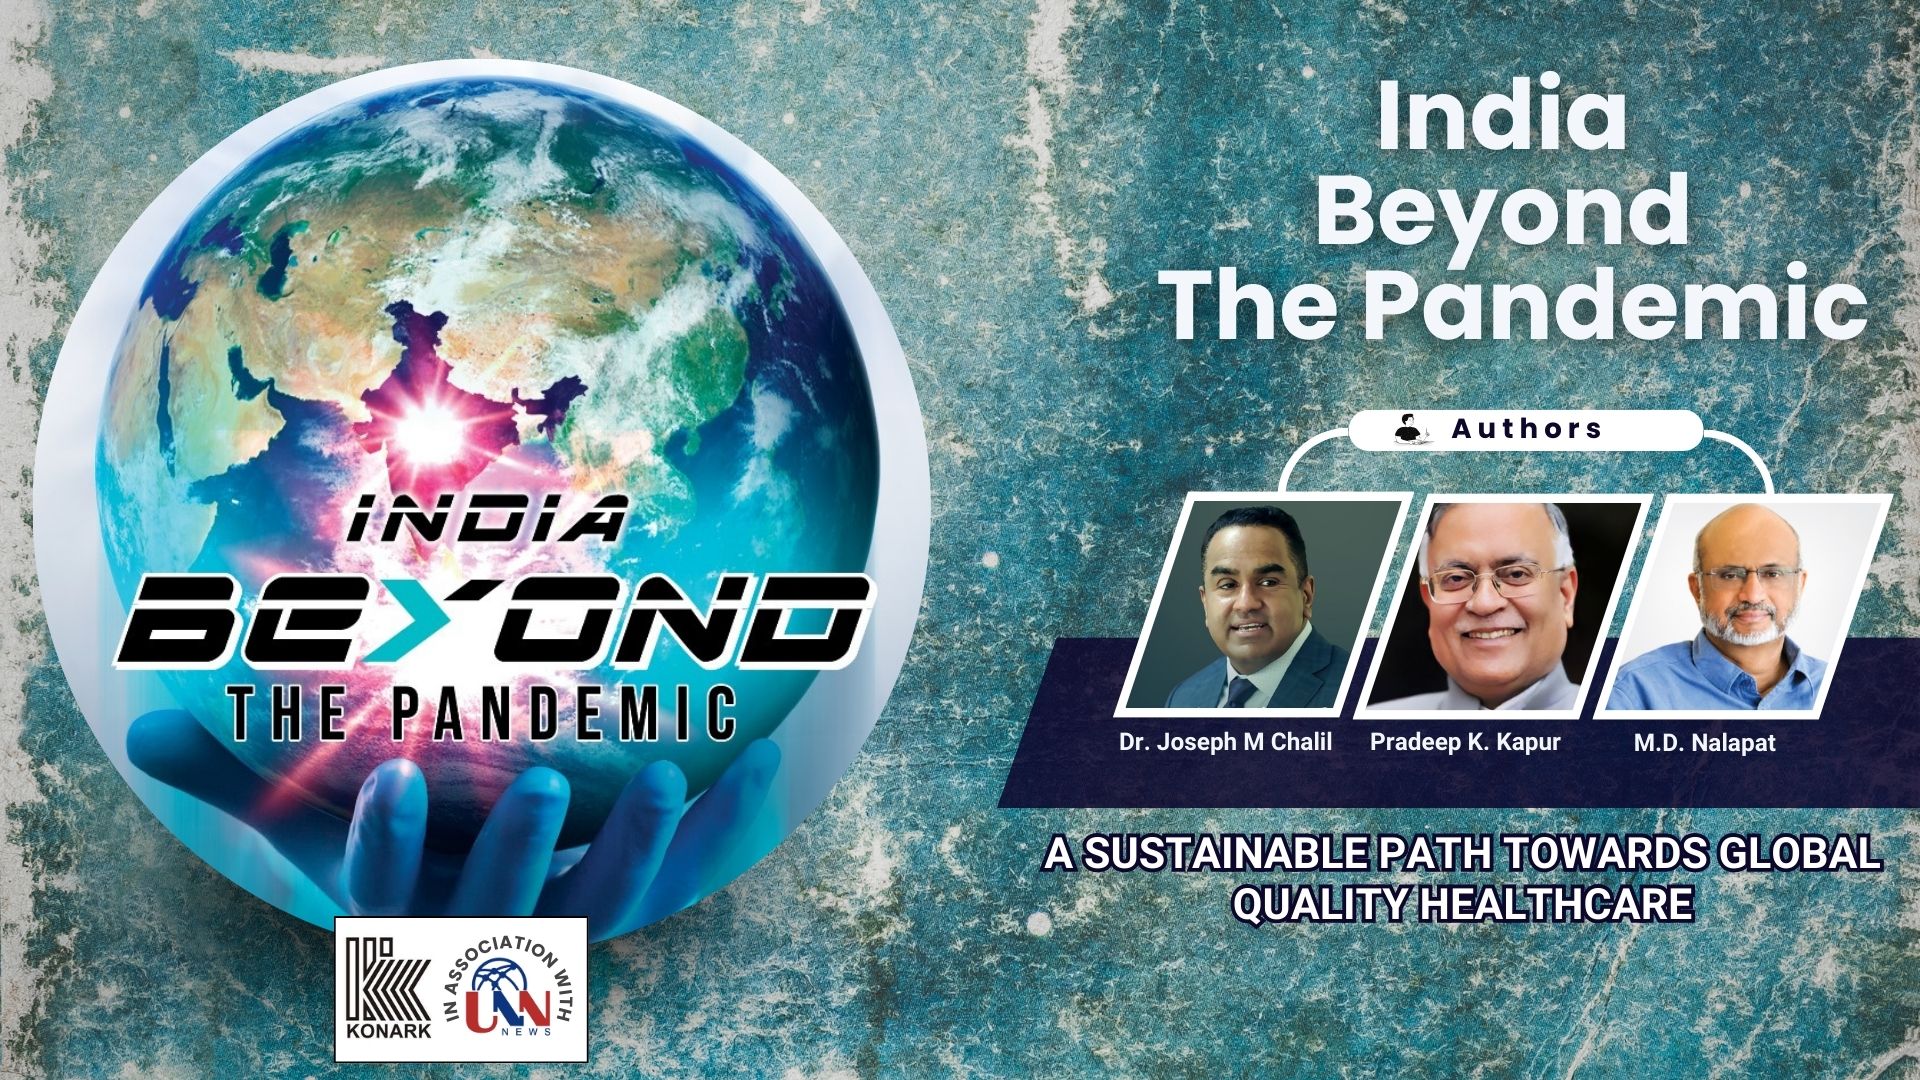 India Beyond The Pandemic Featured Image